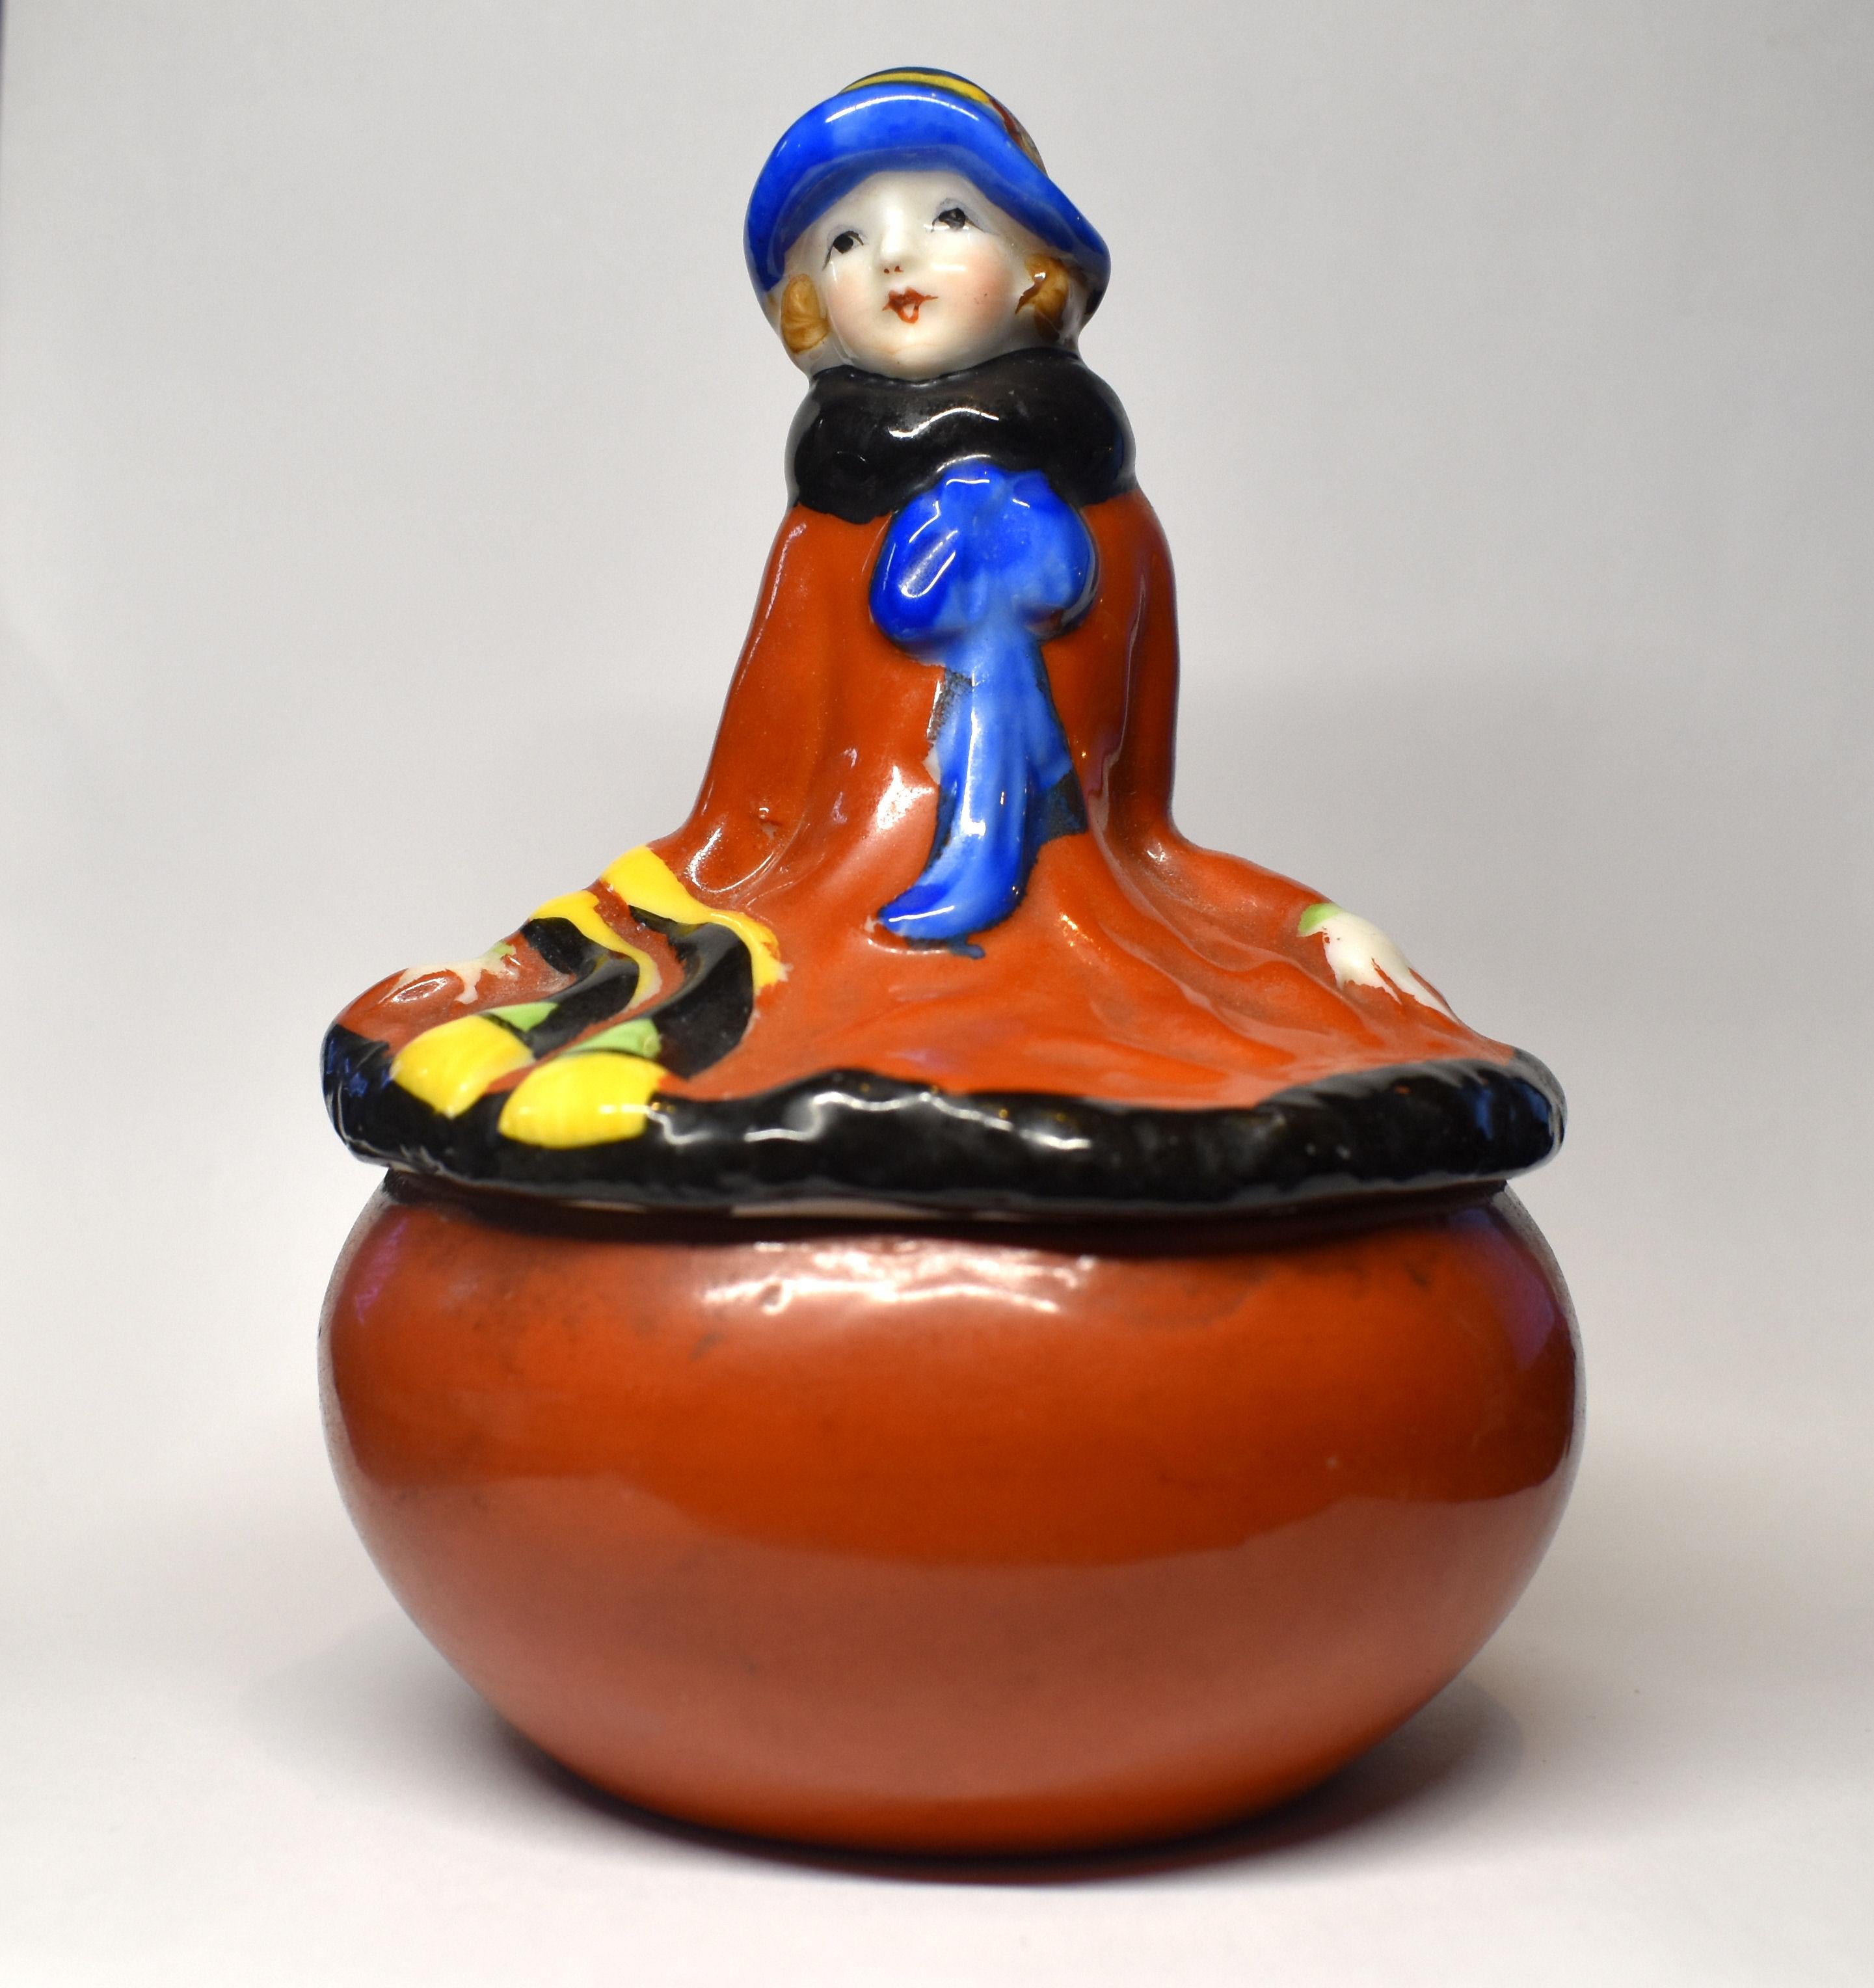 For your consideration is this truly wonderful ladies vanity powder jar/box made from porcelain and marked Japan underneath. Dating to the 1930's this delightful powder jar depicts a flapper girl in the fashion of the day with her cloche hat and fur